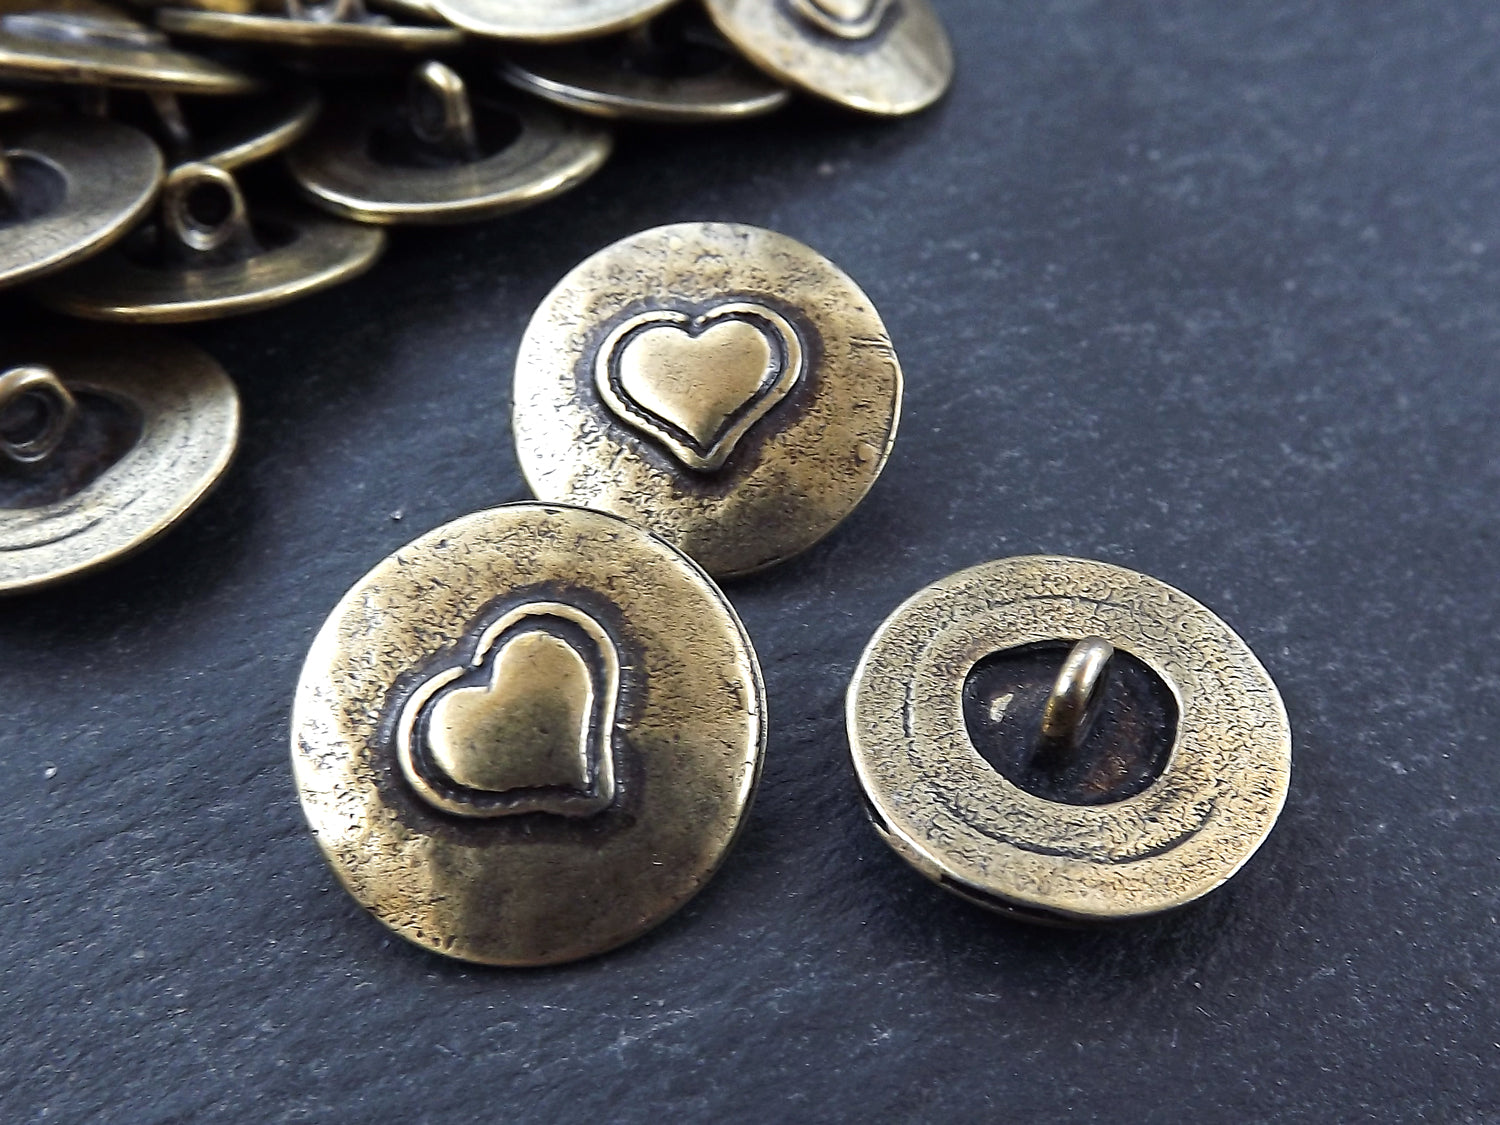 3 Rustic Metal Heart Buttons Antique Bronze Plated - Round Silver